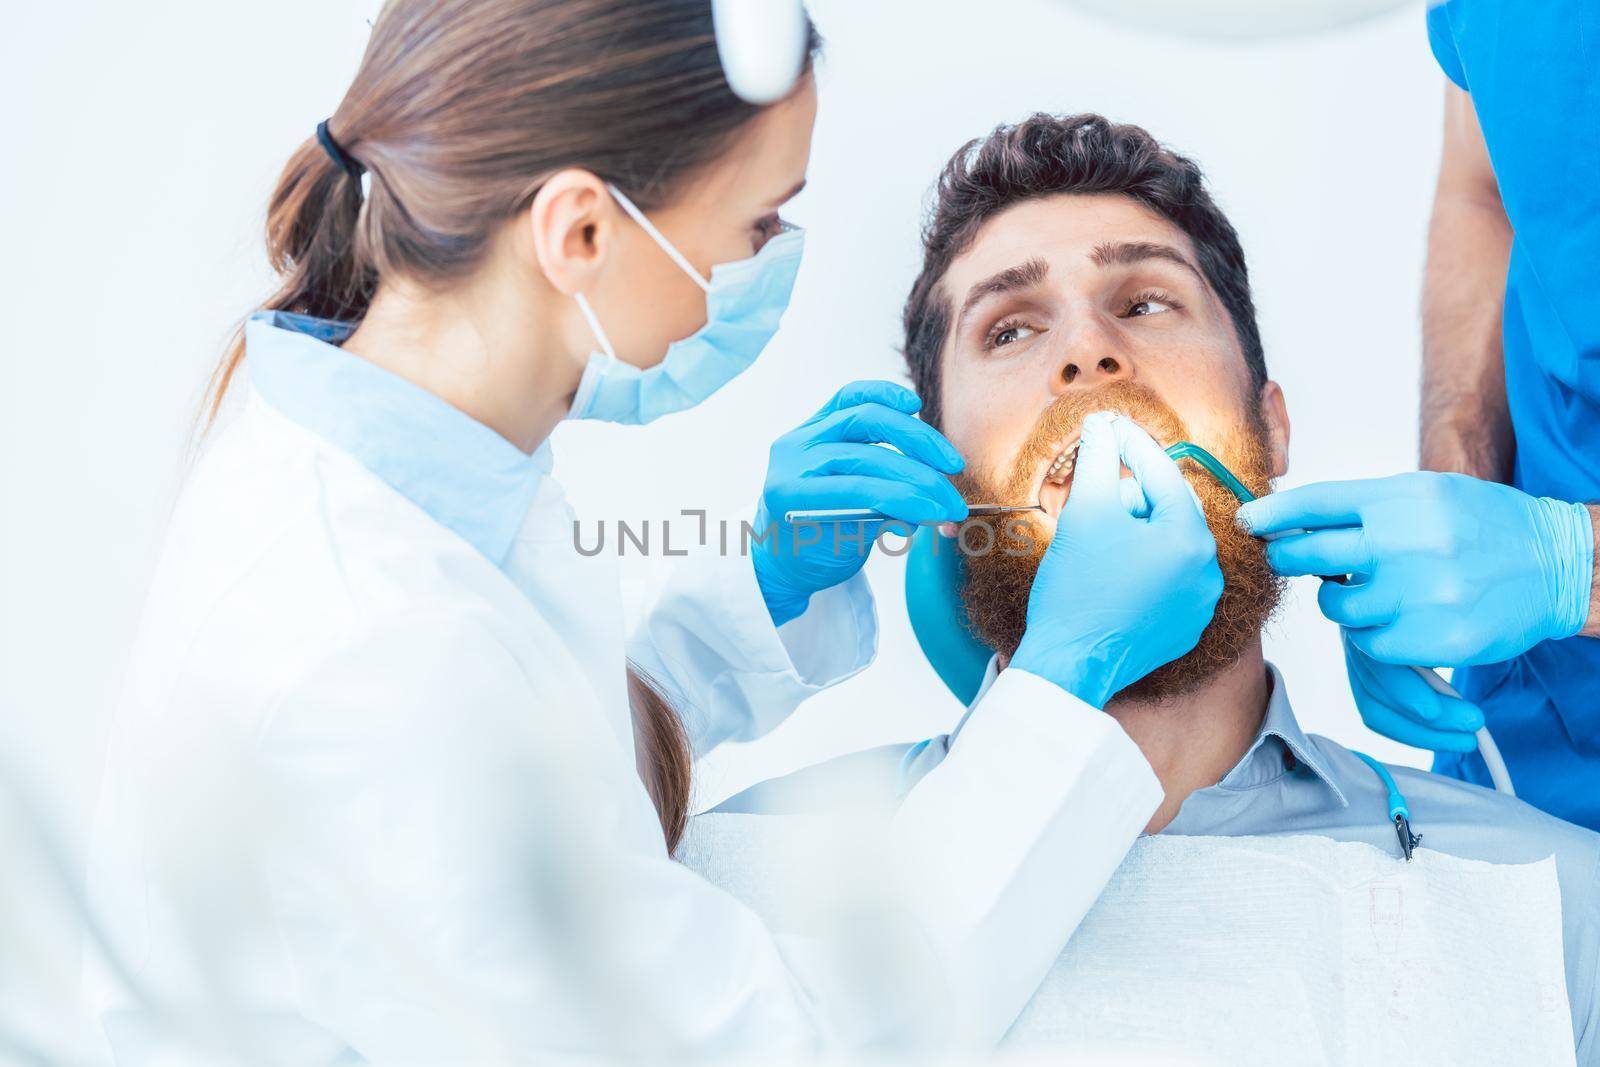 Portrait of a young man looking at camera with a relaxed facial expression, during a painless oral procedure in the modern dental office of an experienced dentist